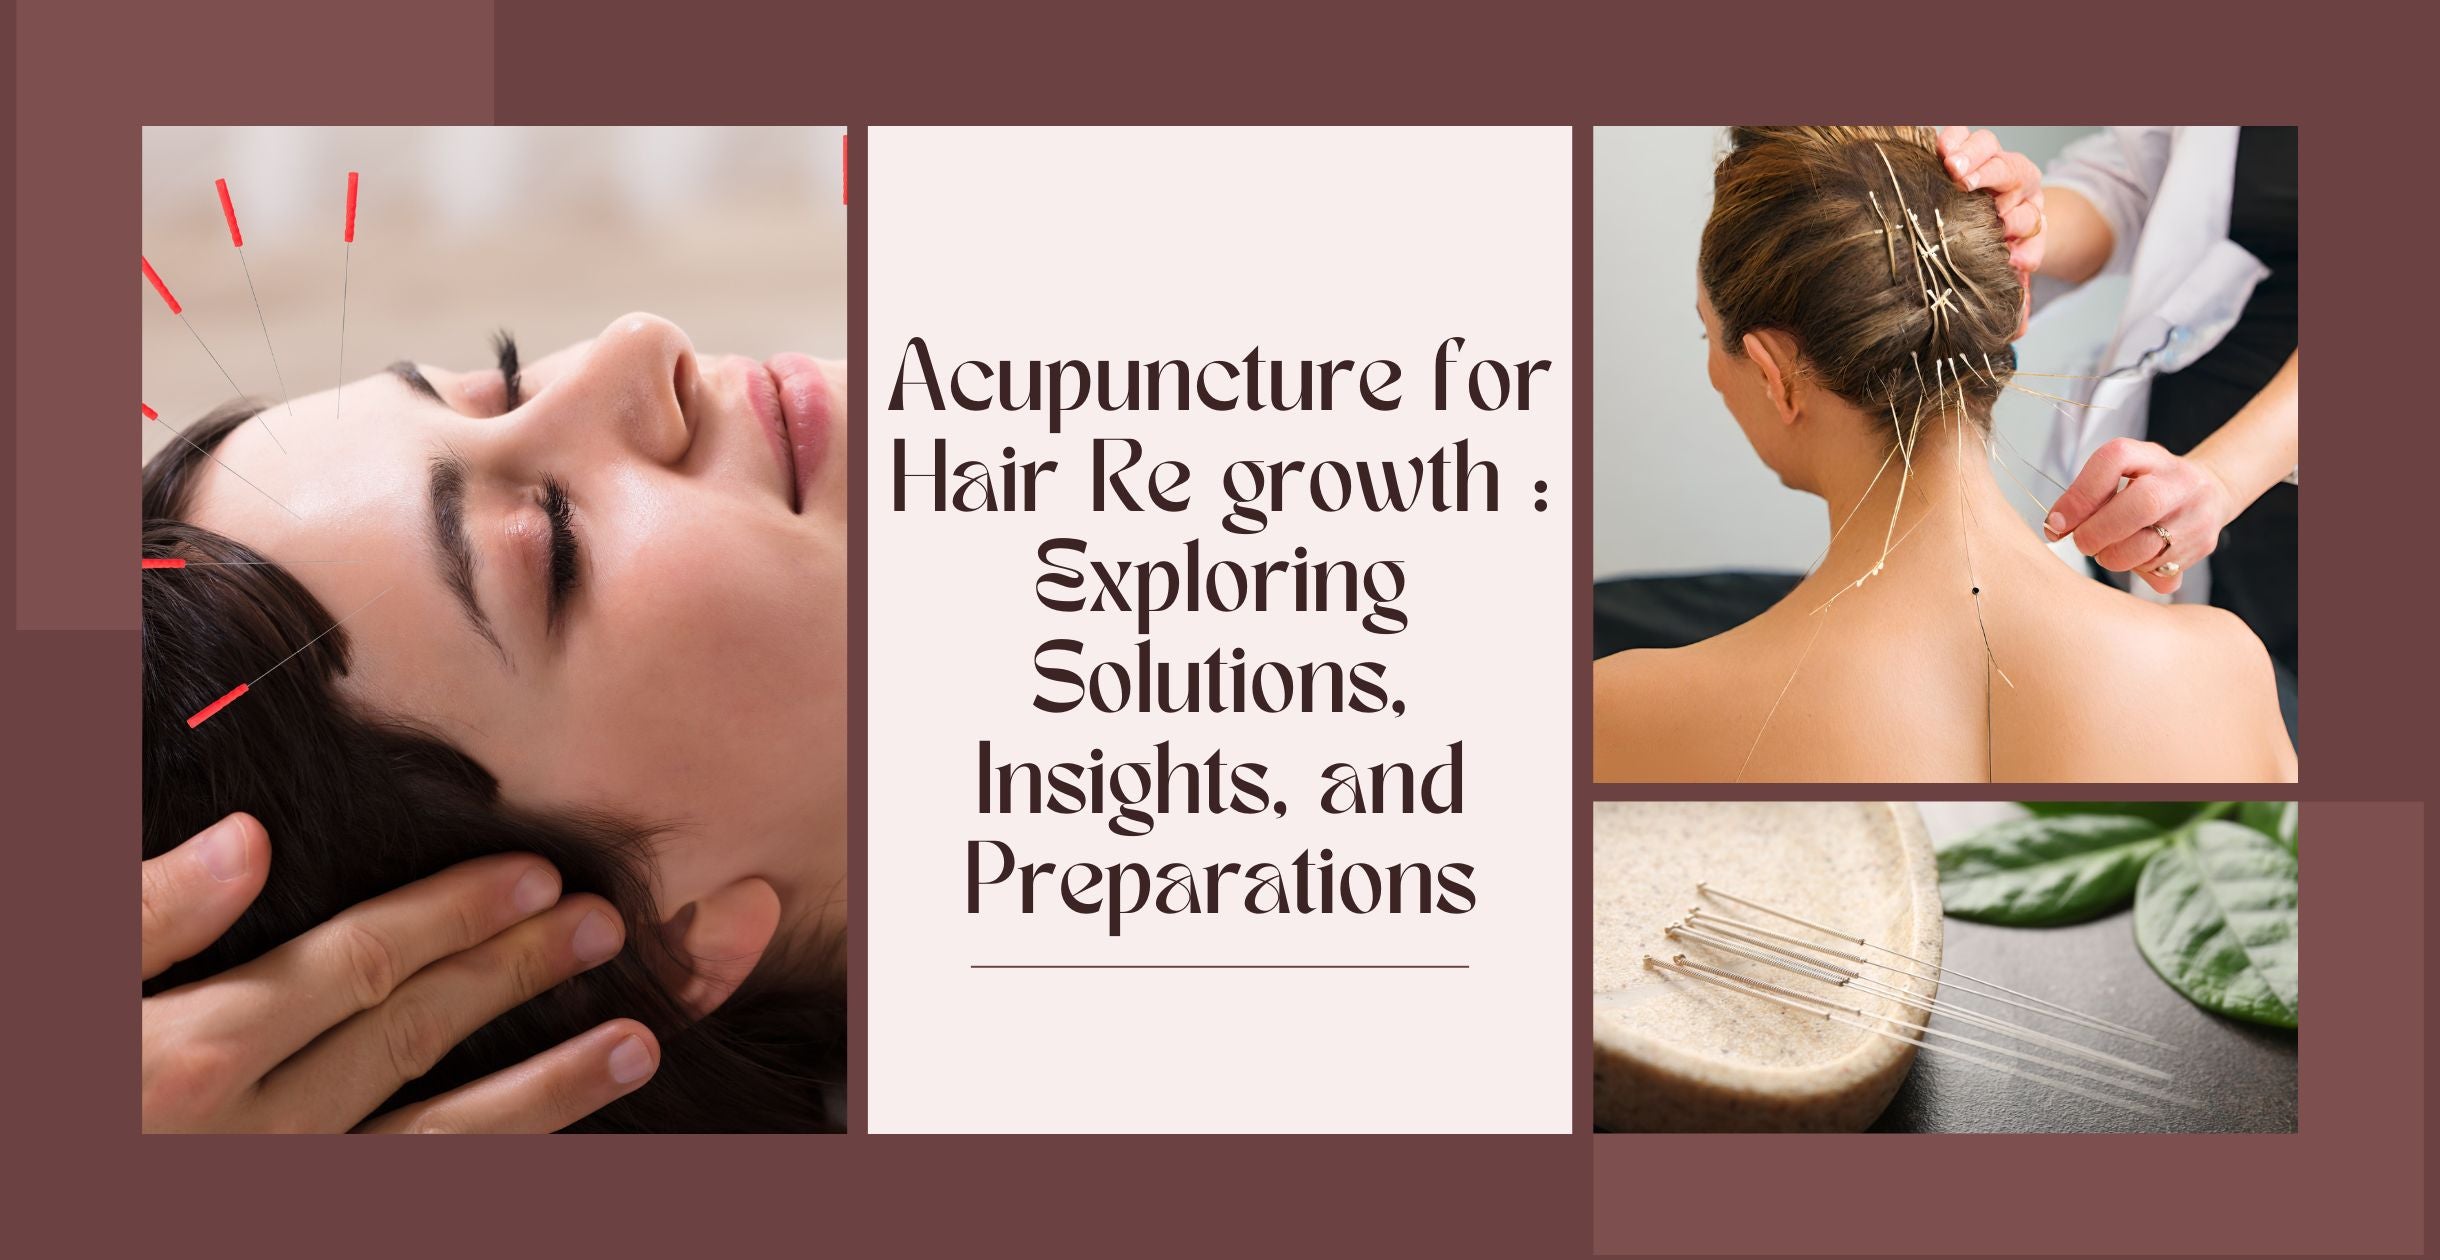 Acupuncture for Hair Re growth : Exploring Solutions, Insights, and Preparations